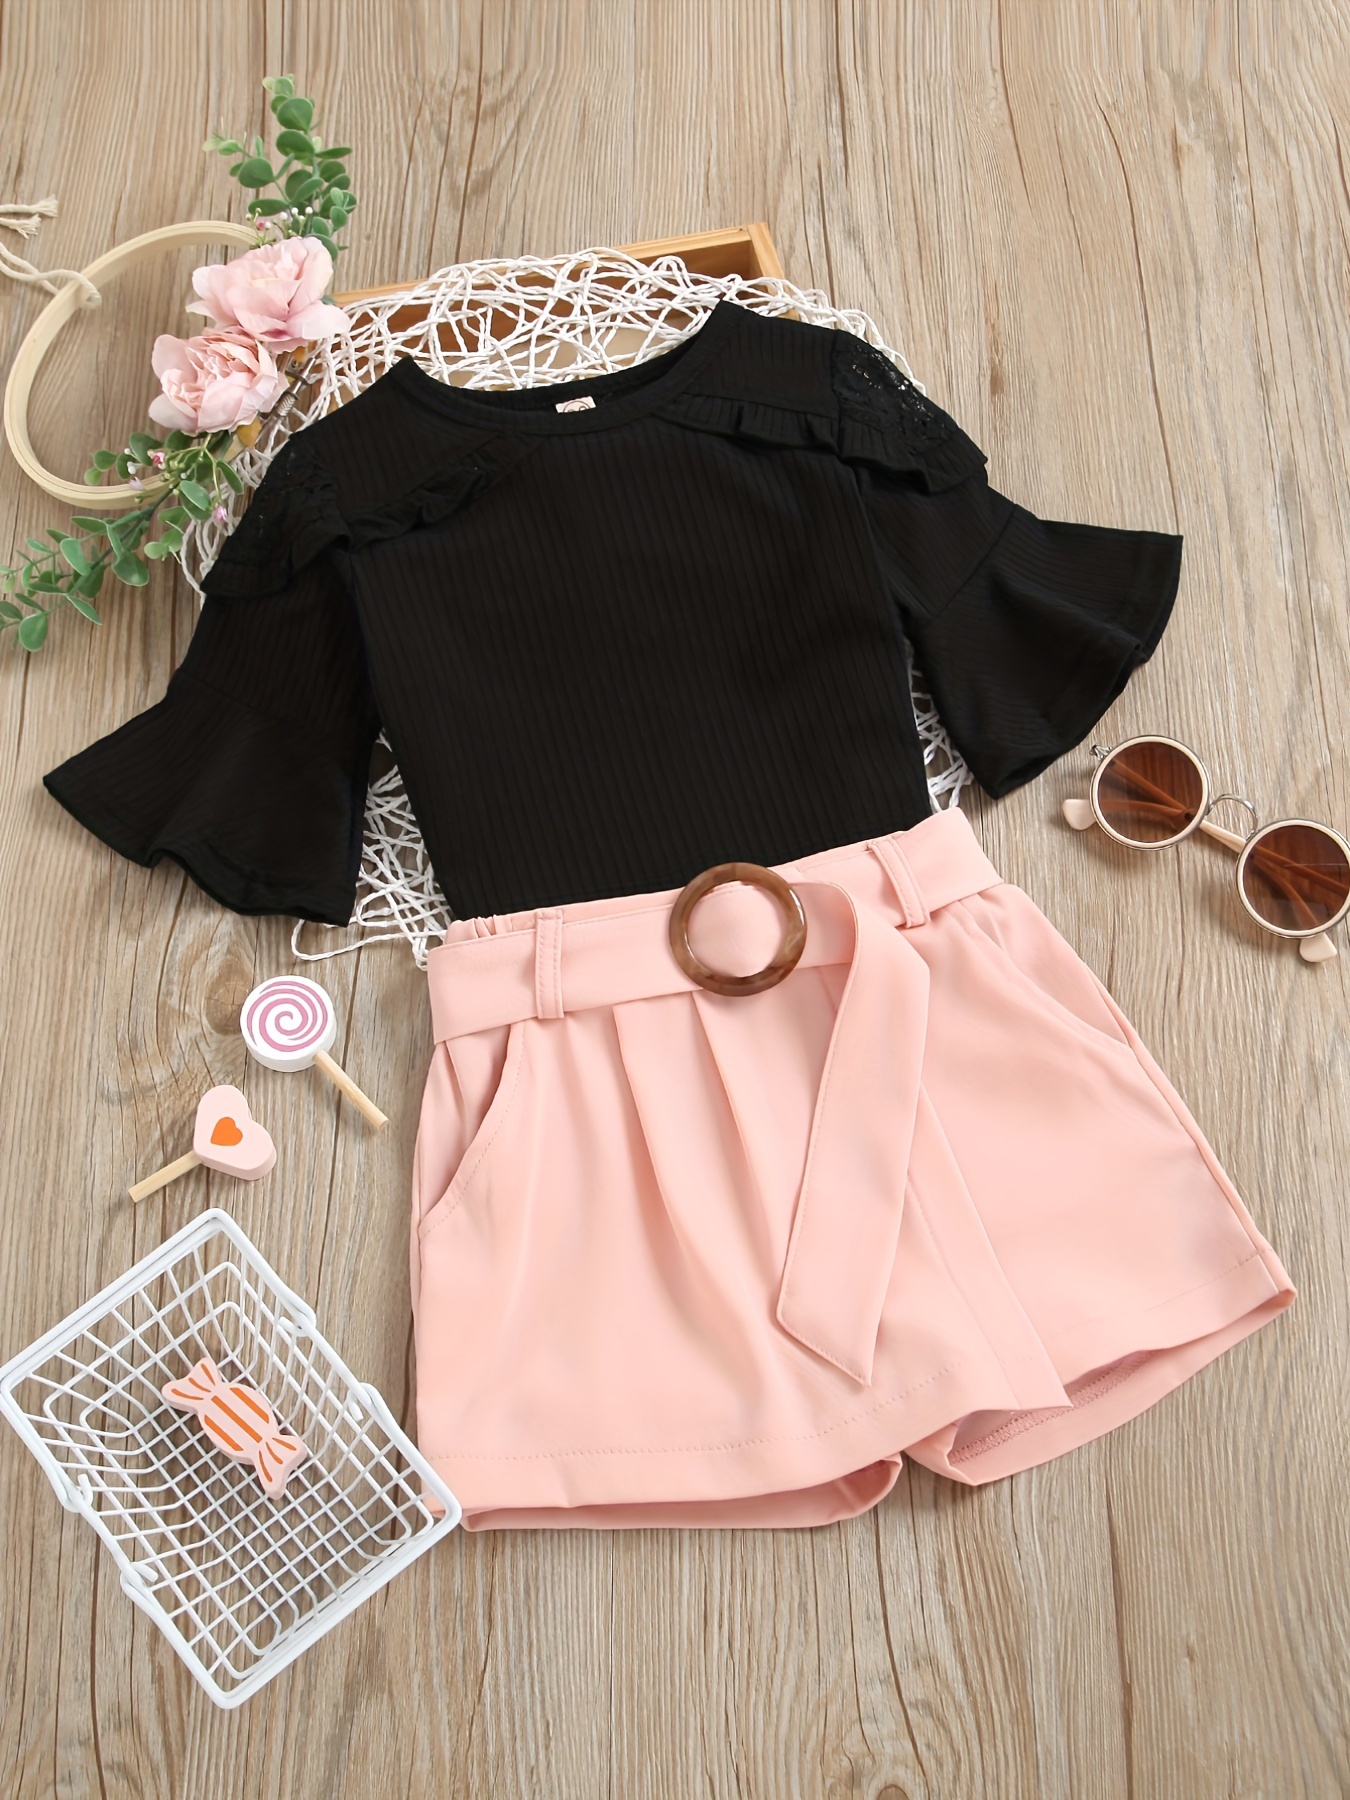 summer pink shorts outfit